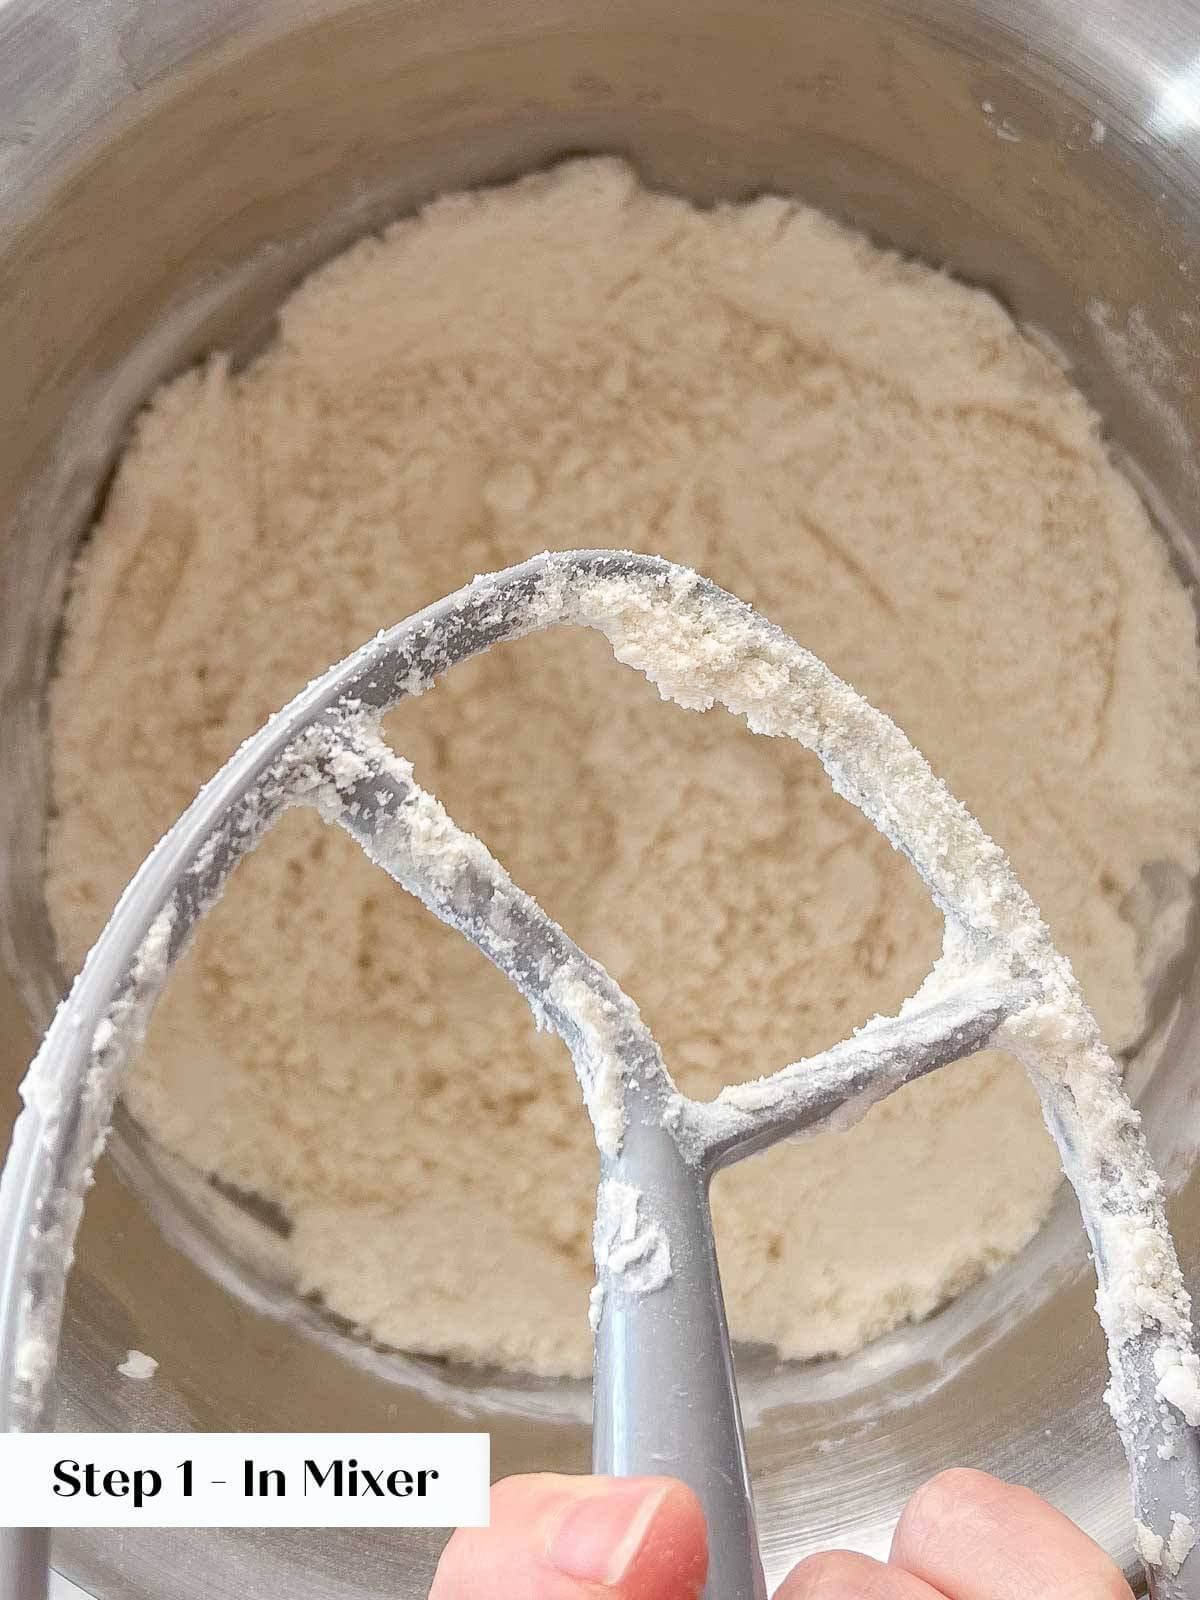 crisco cut in with a stand mixer shown on paddle attachment.